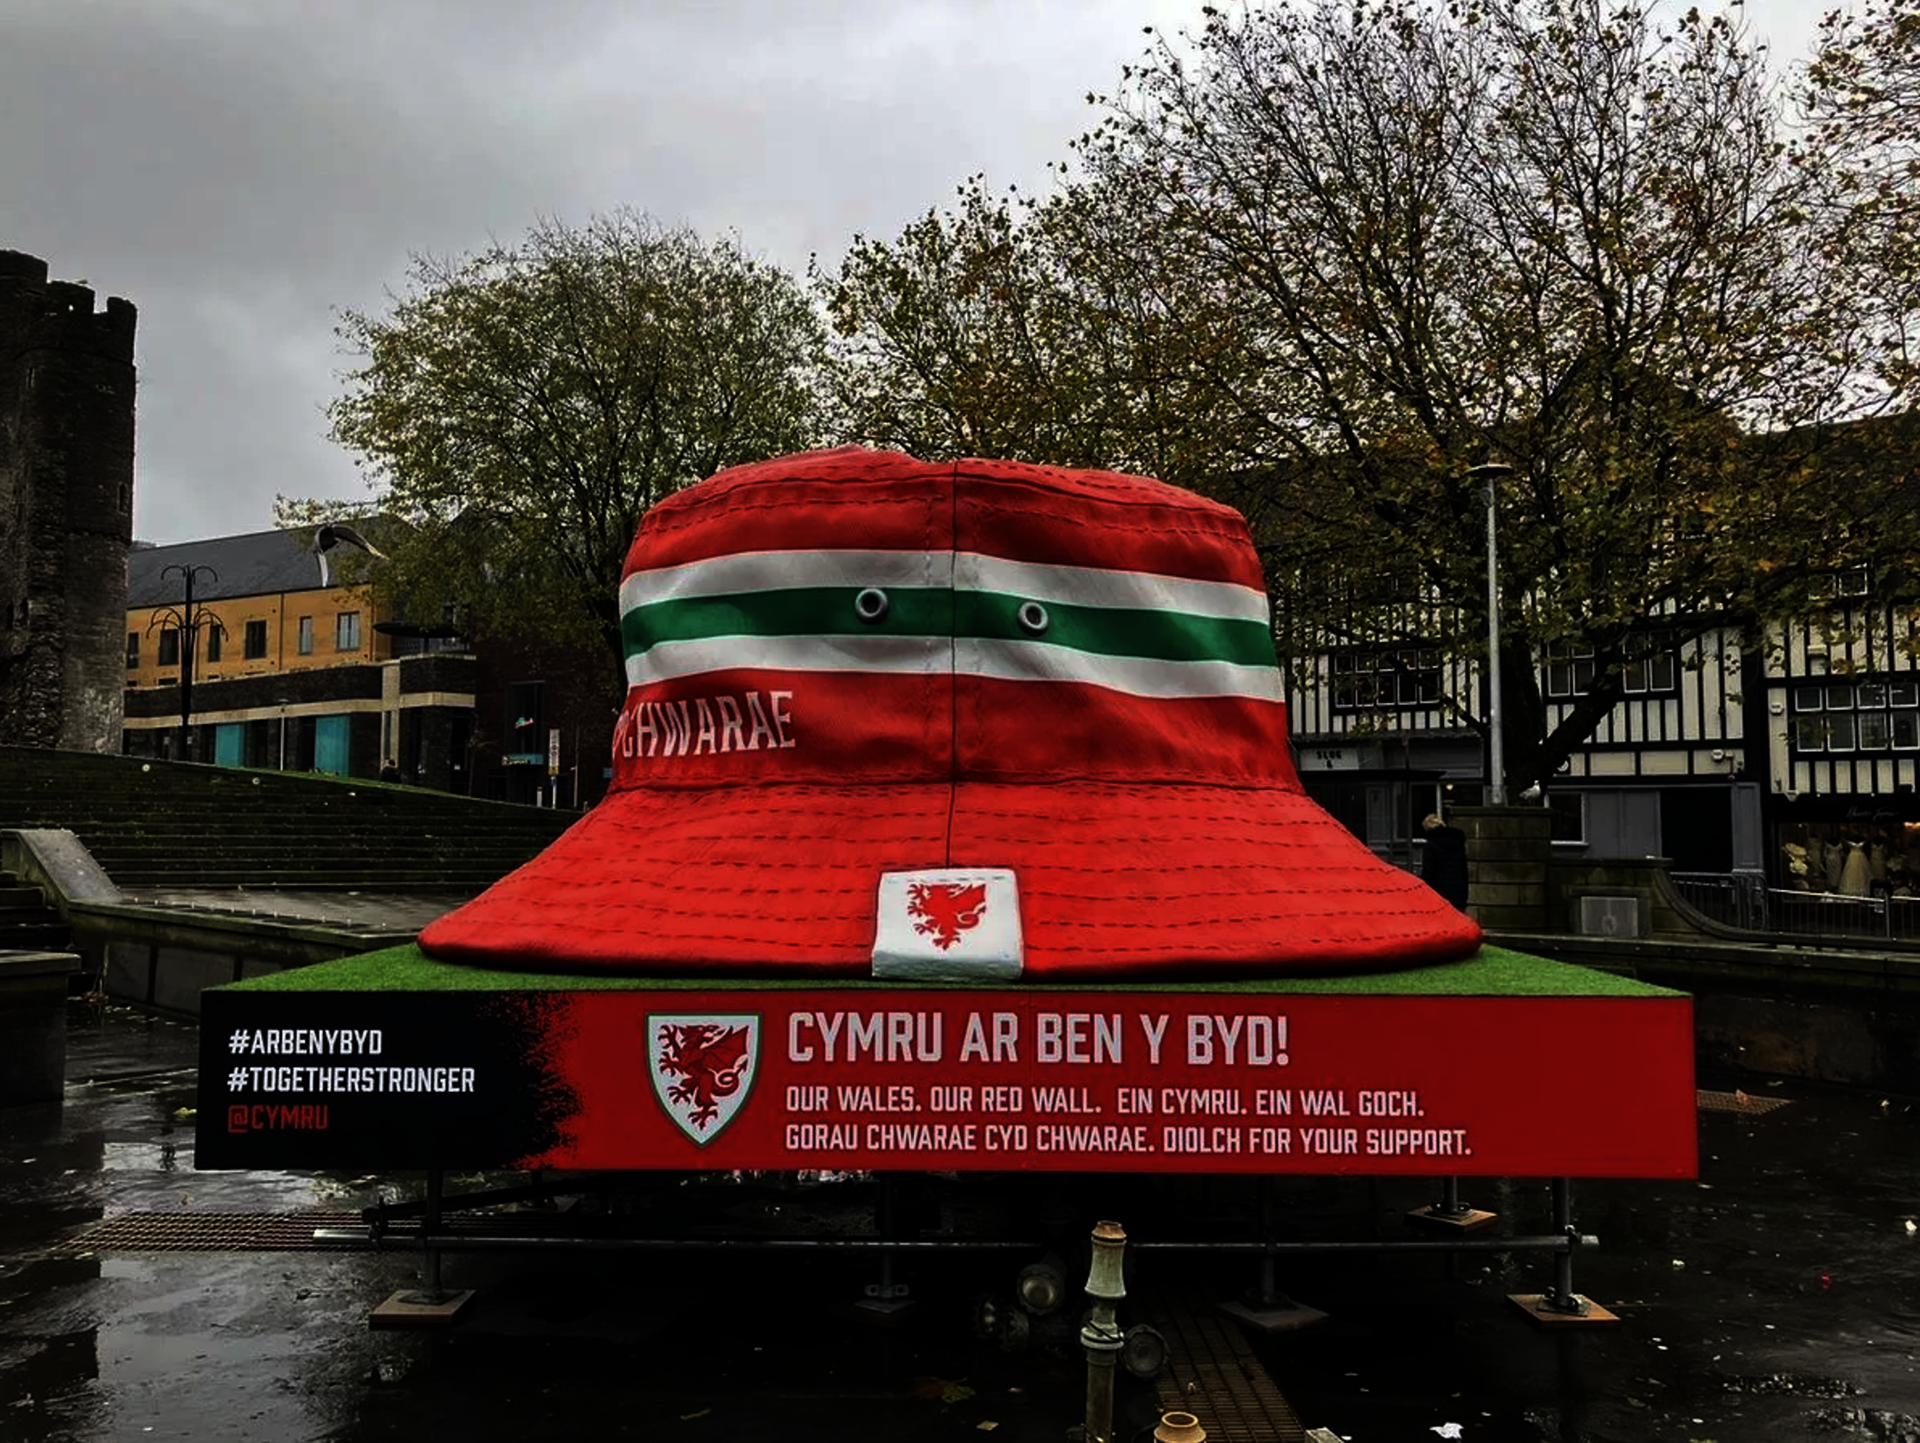 A giant red and green bucket hat sculpture in Swansea's city center.